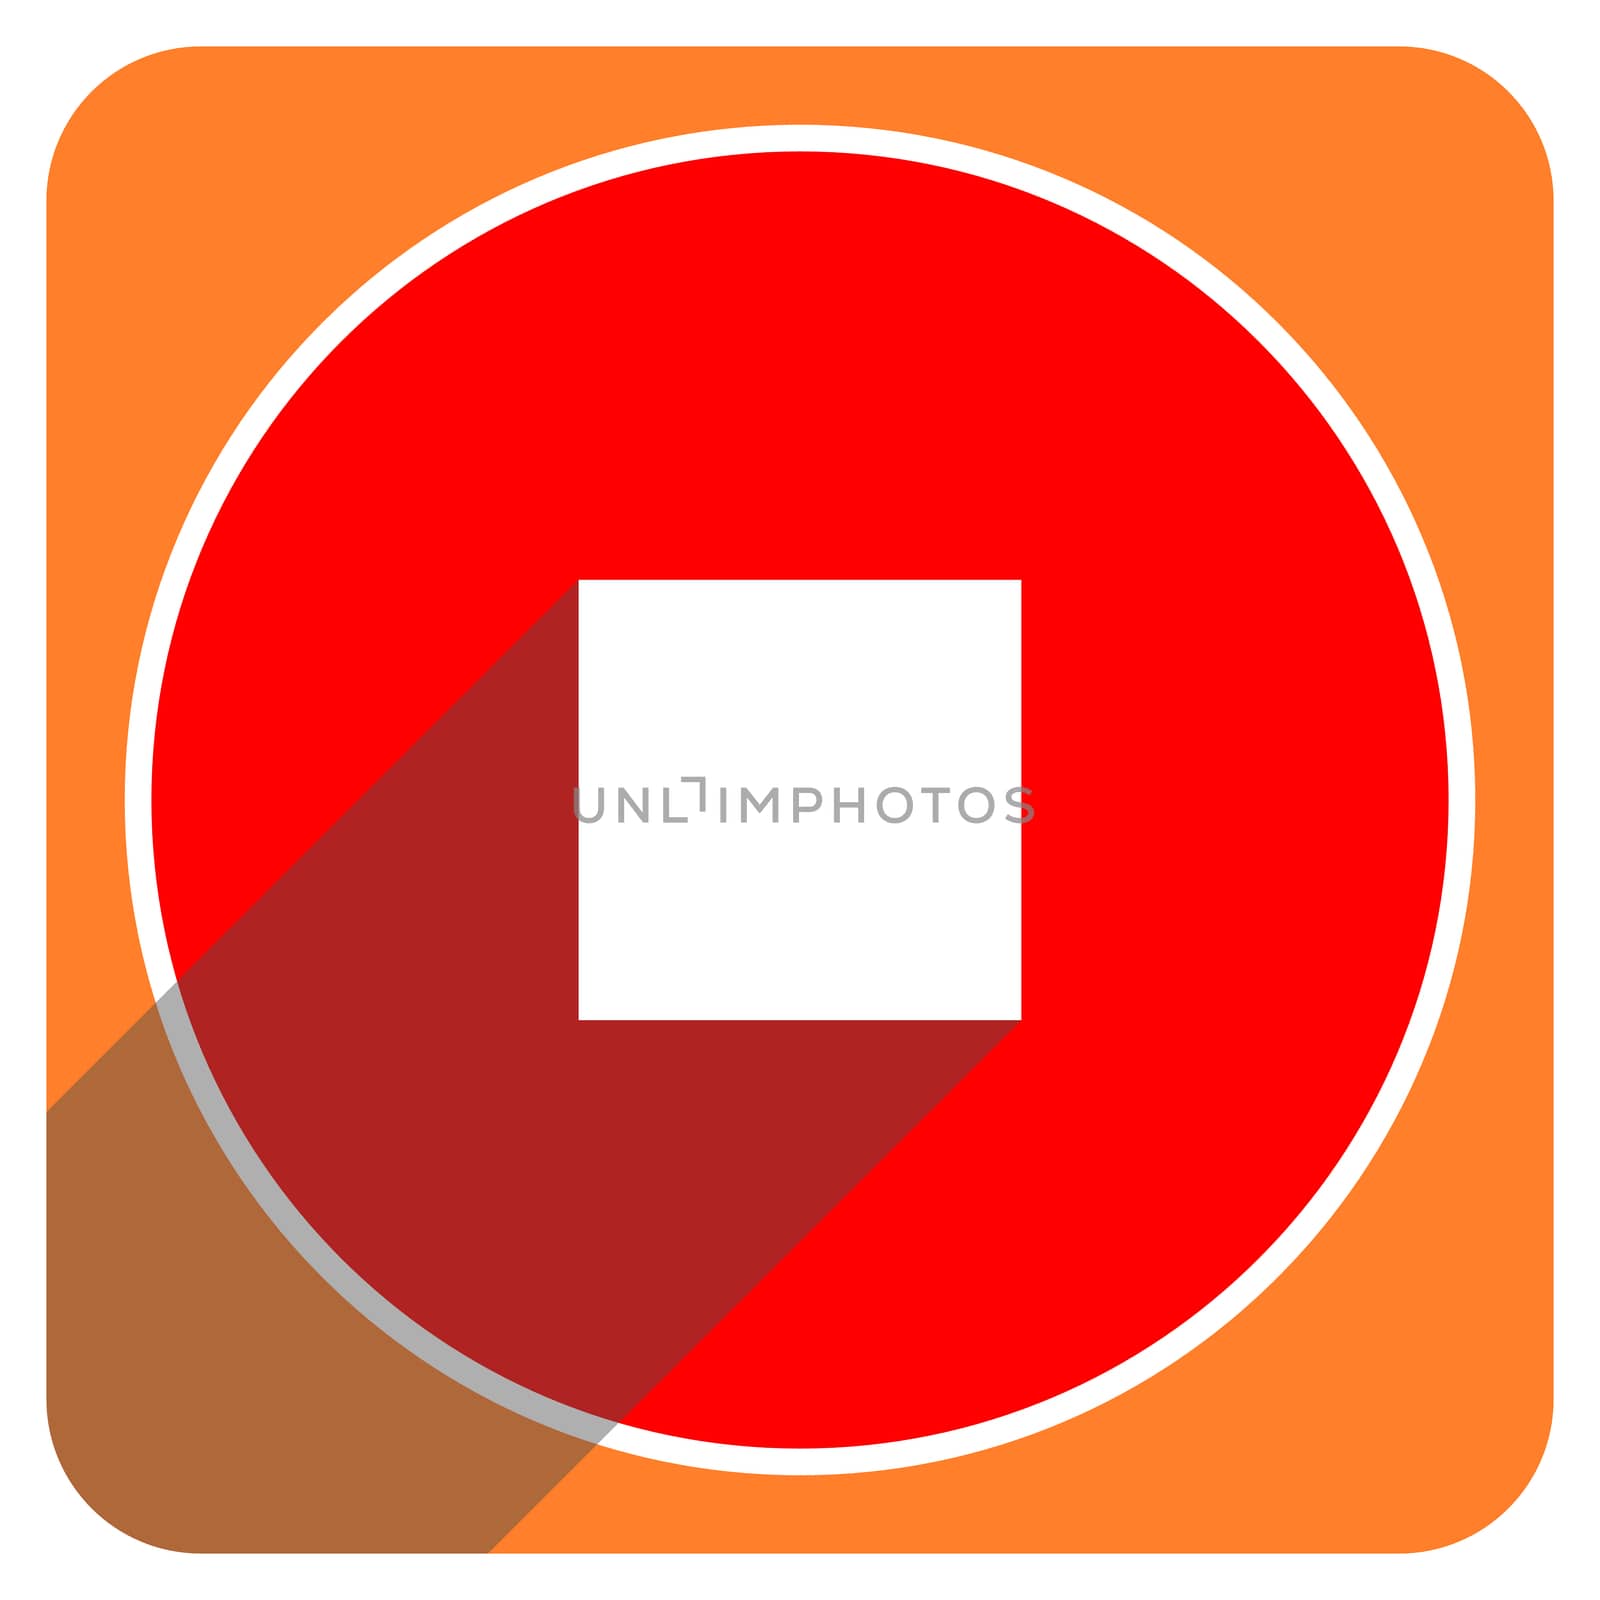 stop red flat icon isolated